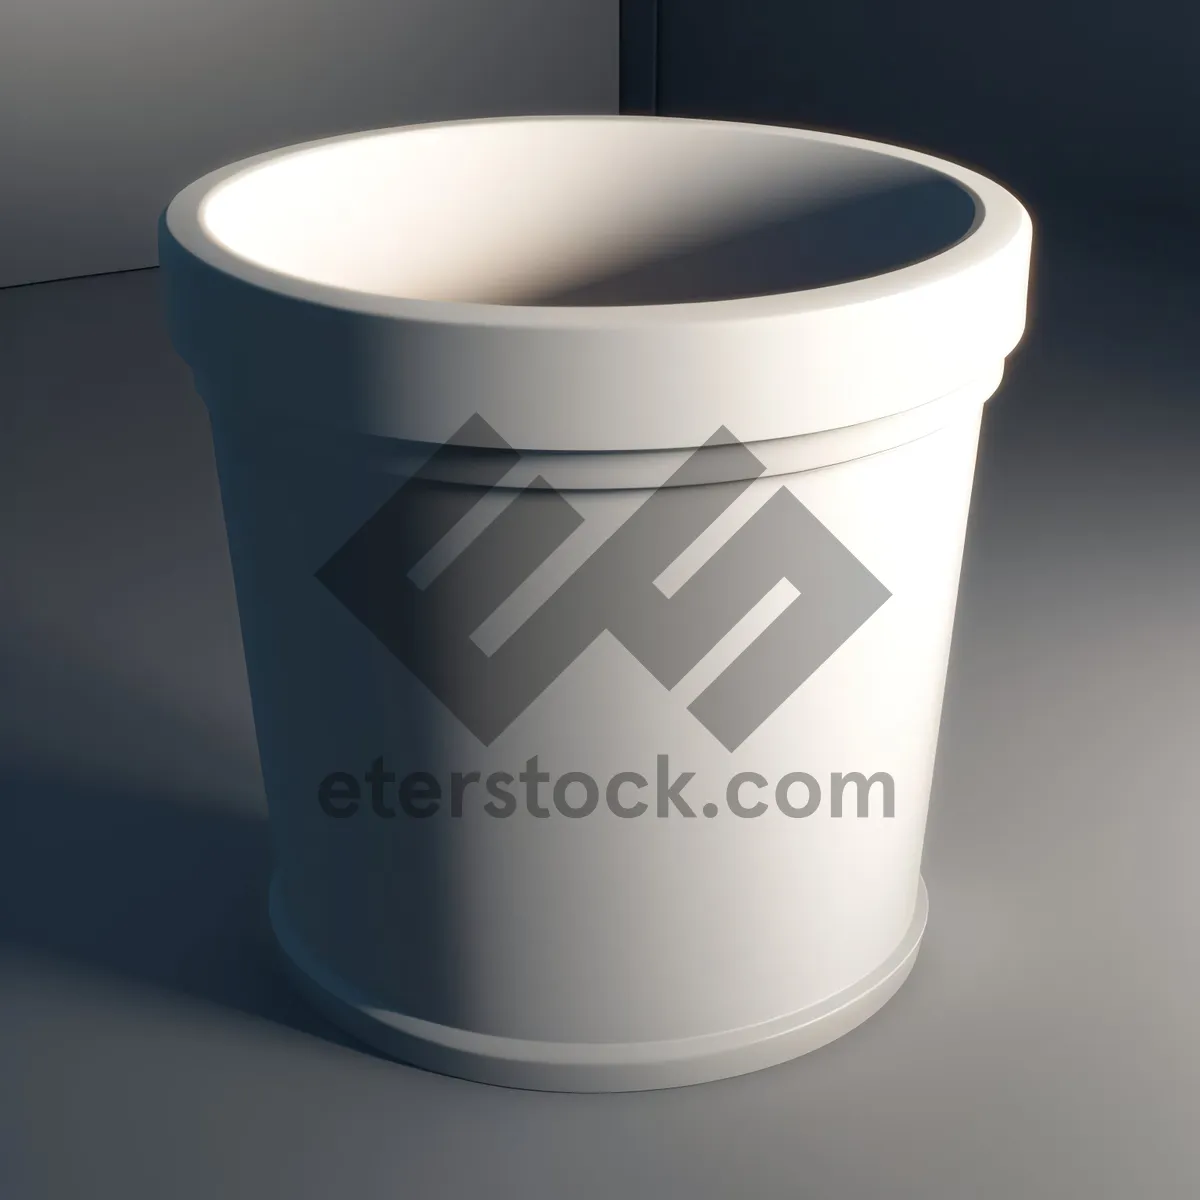 Picture of Empty Ceramic Coffee Mug on Table